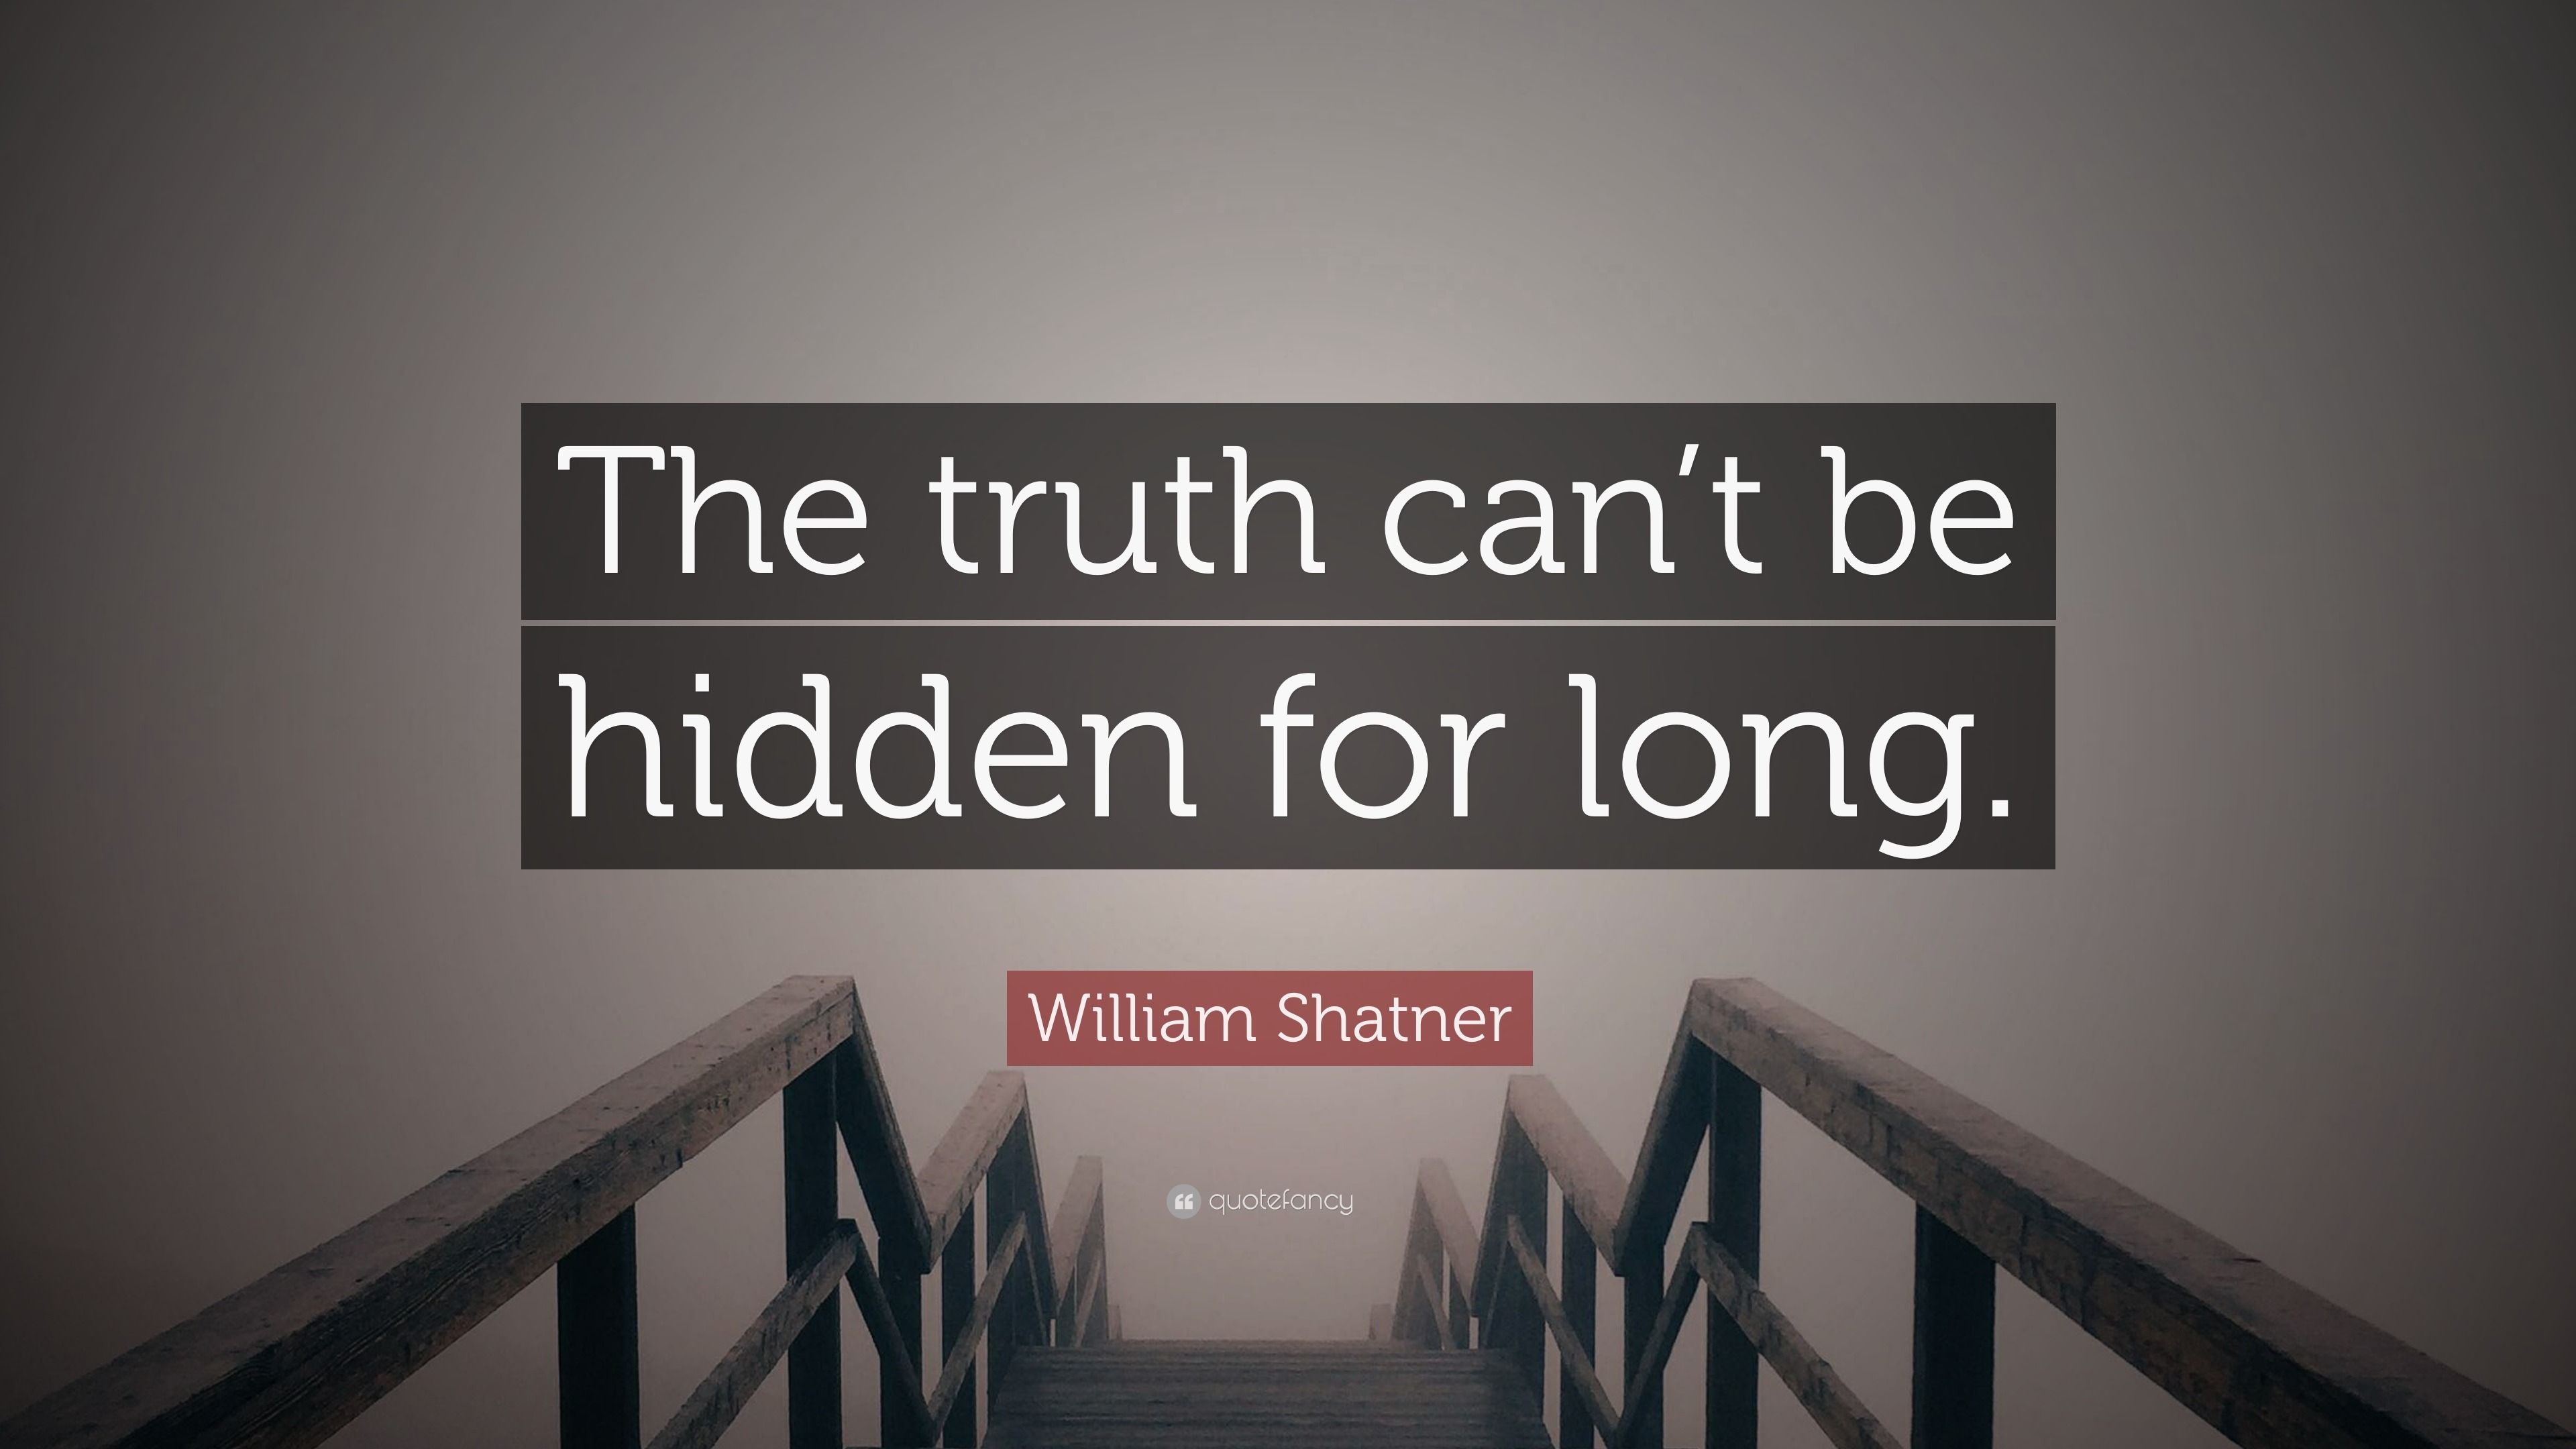 738877-William-Shatner-Quote-The-truth-can-t-be-hidden-for-long.jpg